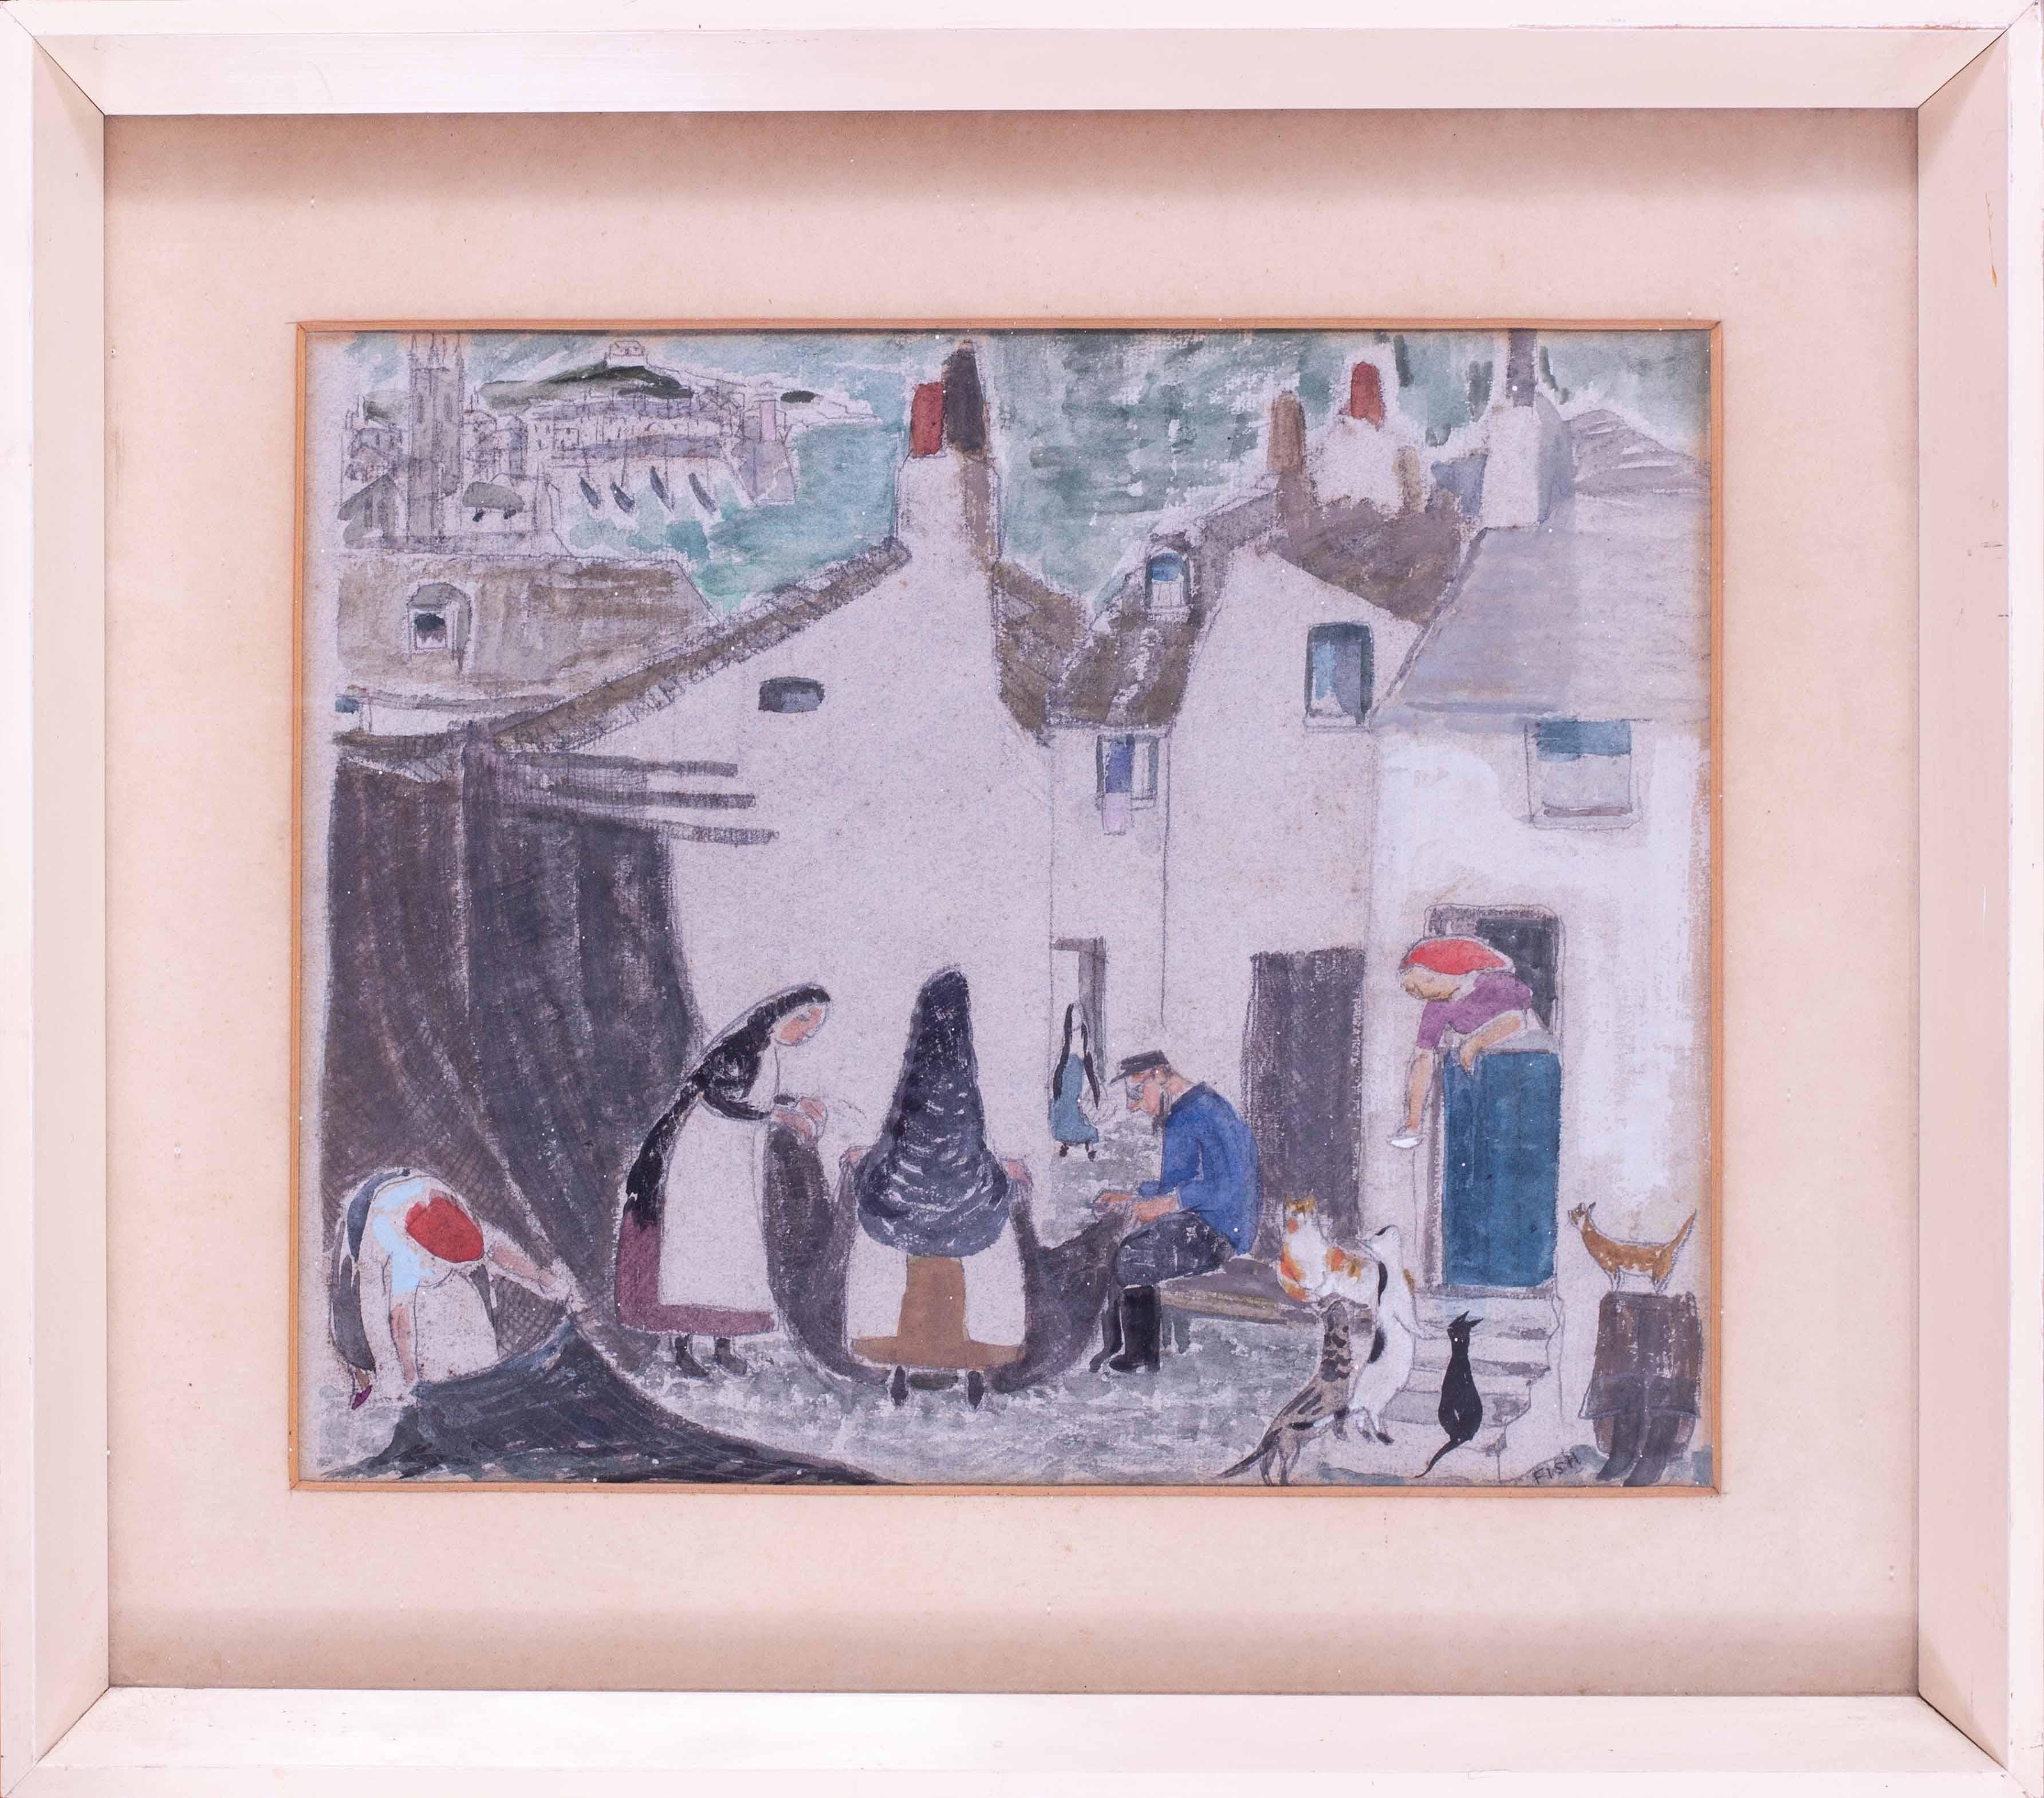 'The Cats of St. Ives' scene by British female artist Anne Harriet Sefton Fish 